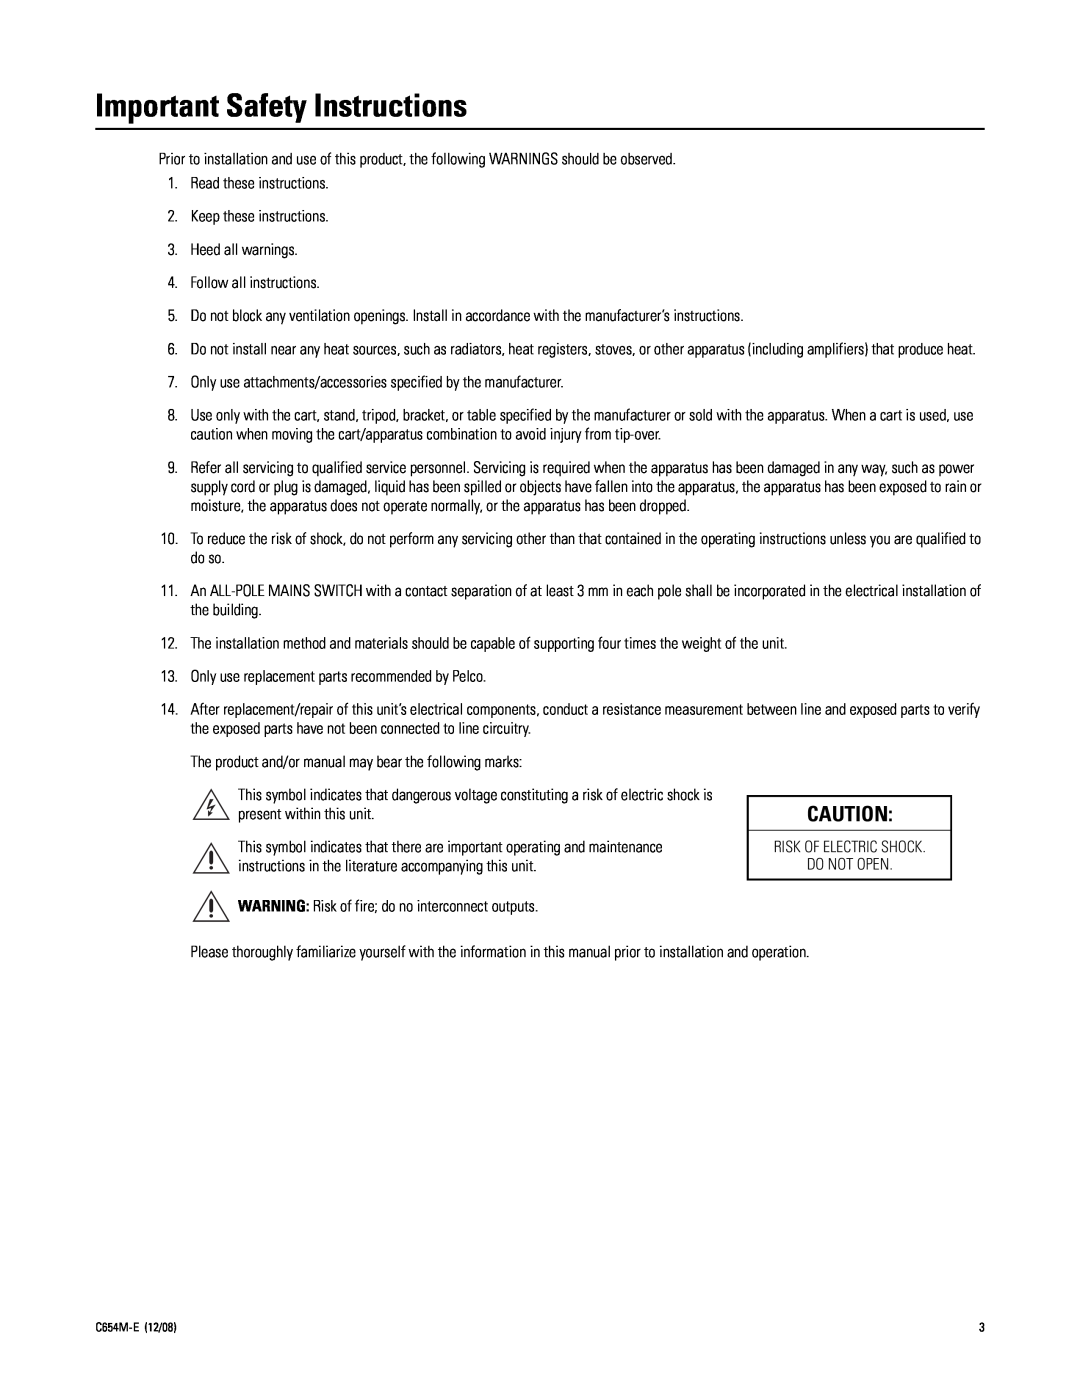 Pelco C654M-E (12/08) 3 manual Important Safety Instructions 